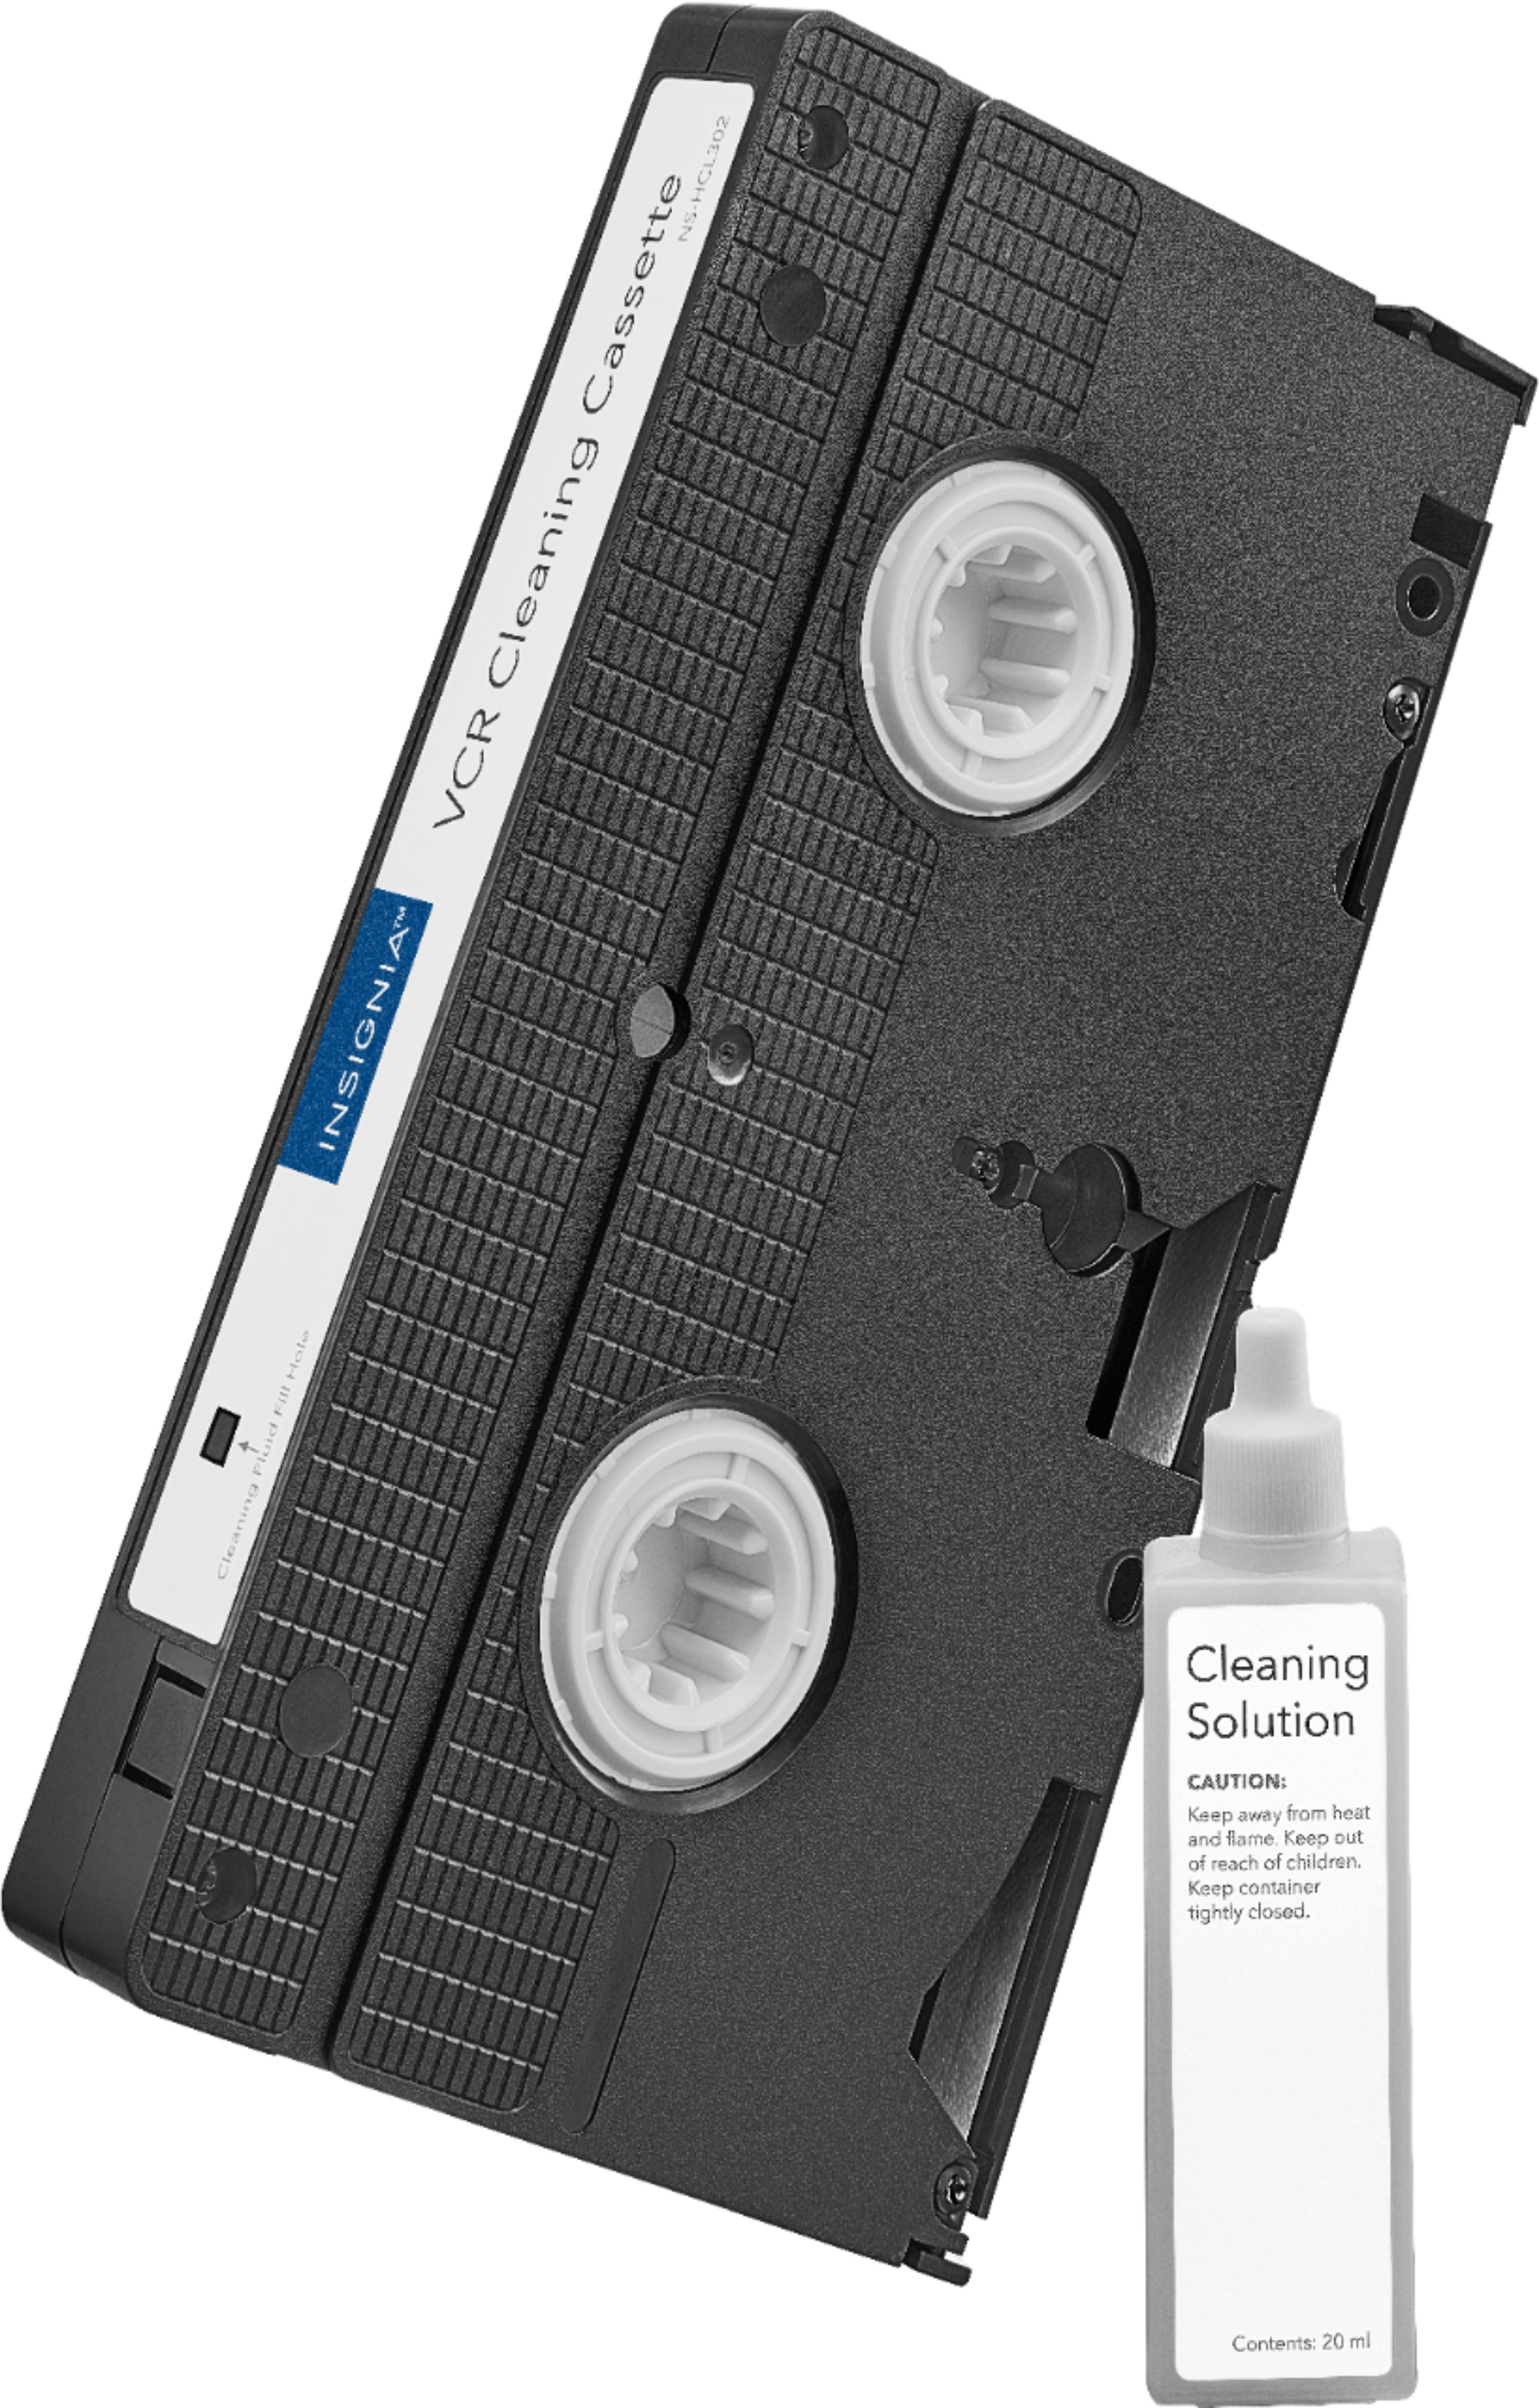 Insignia VCR Video Head Cleaner (White) $3.99 + Free Store Pickup @ Best Buy